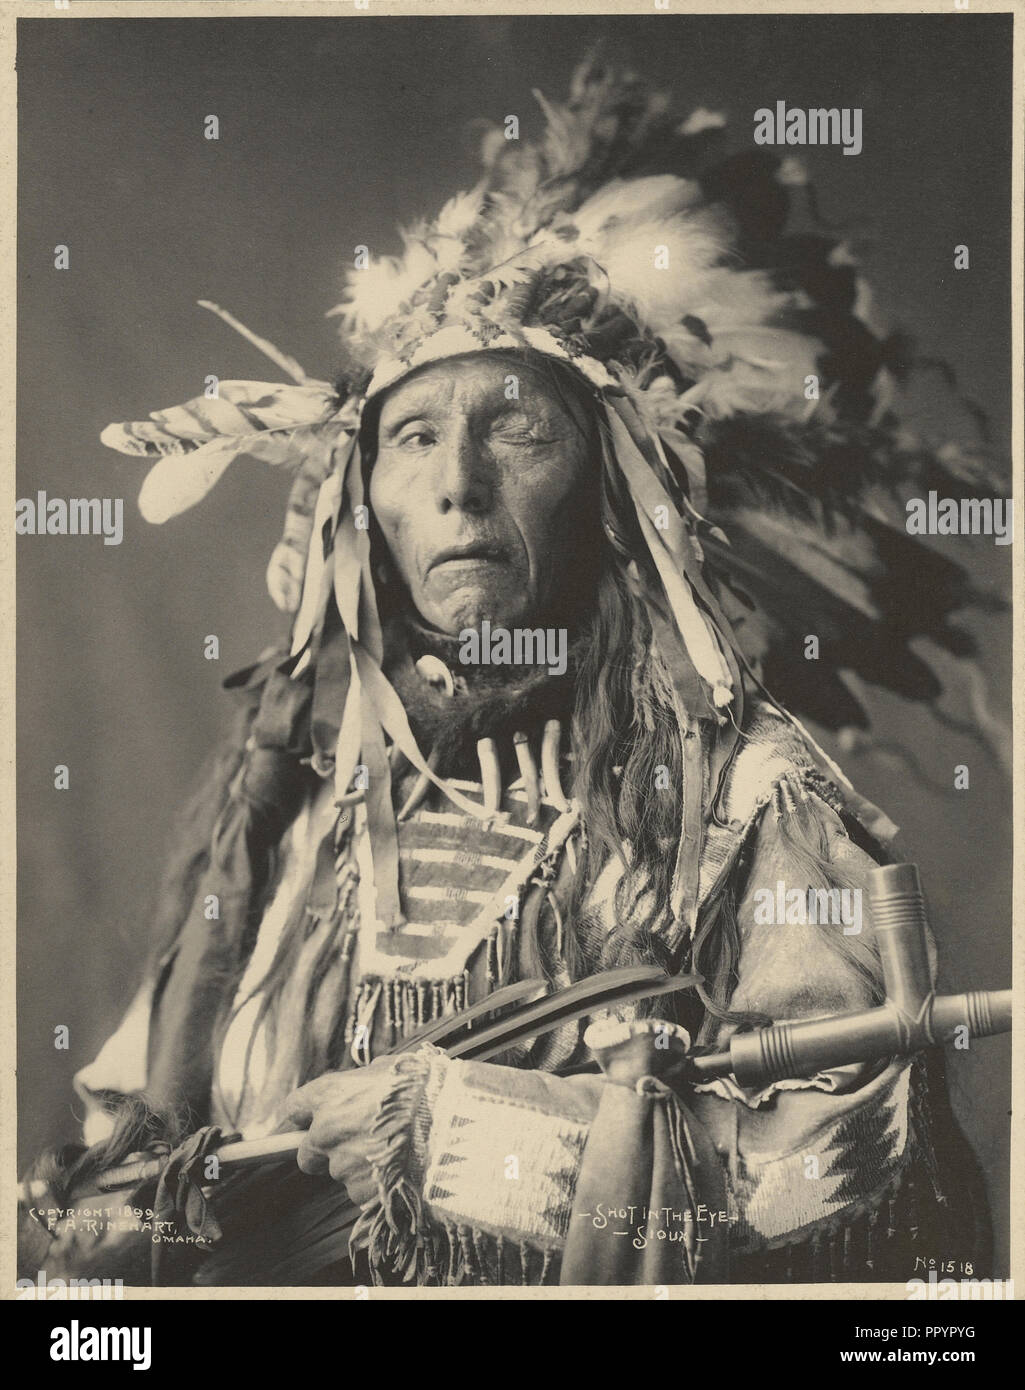 Shot in the Eye, Sioux; Adolph F. Muhr, American, died 1913, Frank A. Rinehart, American, 1861 - 1928, 1899; Platinum print Stock Photo